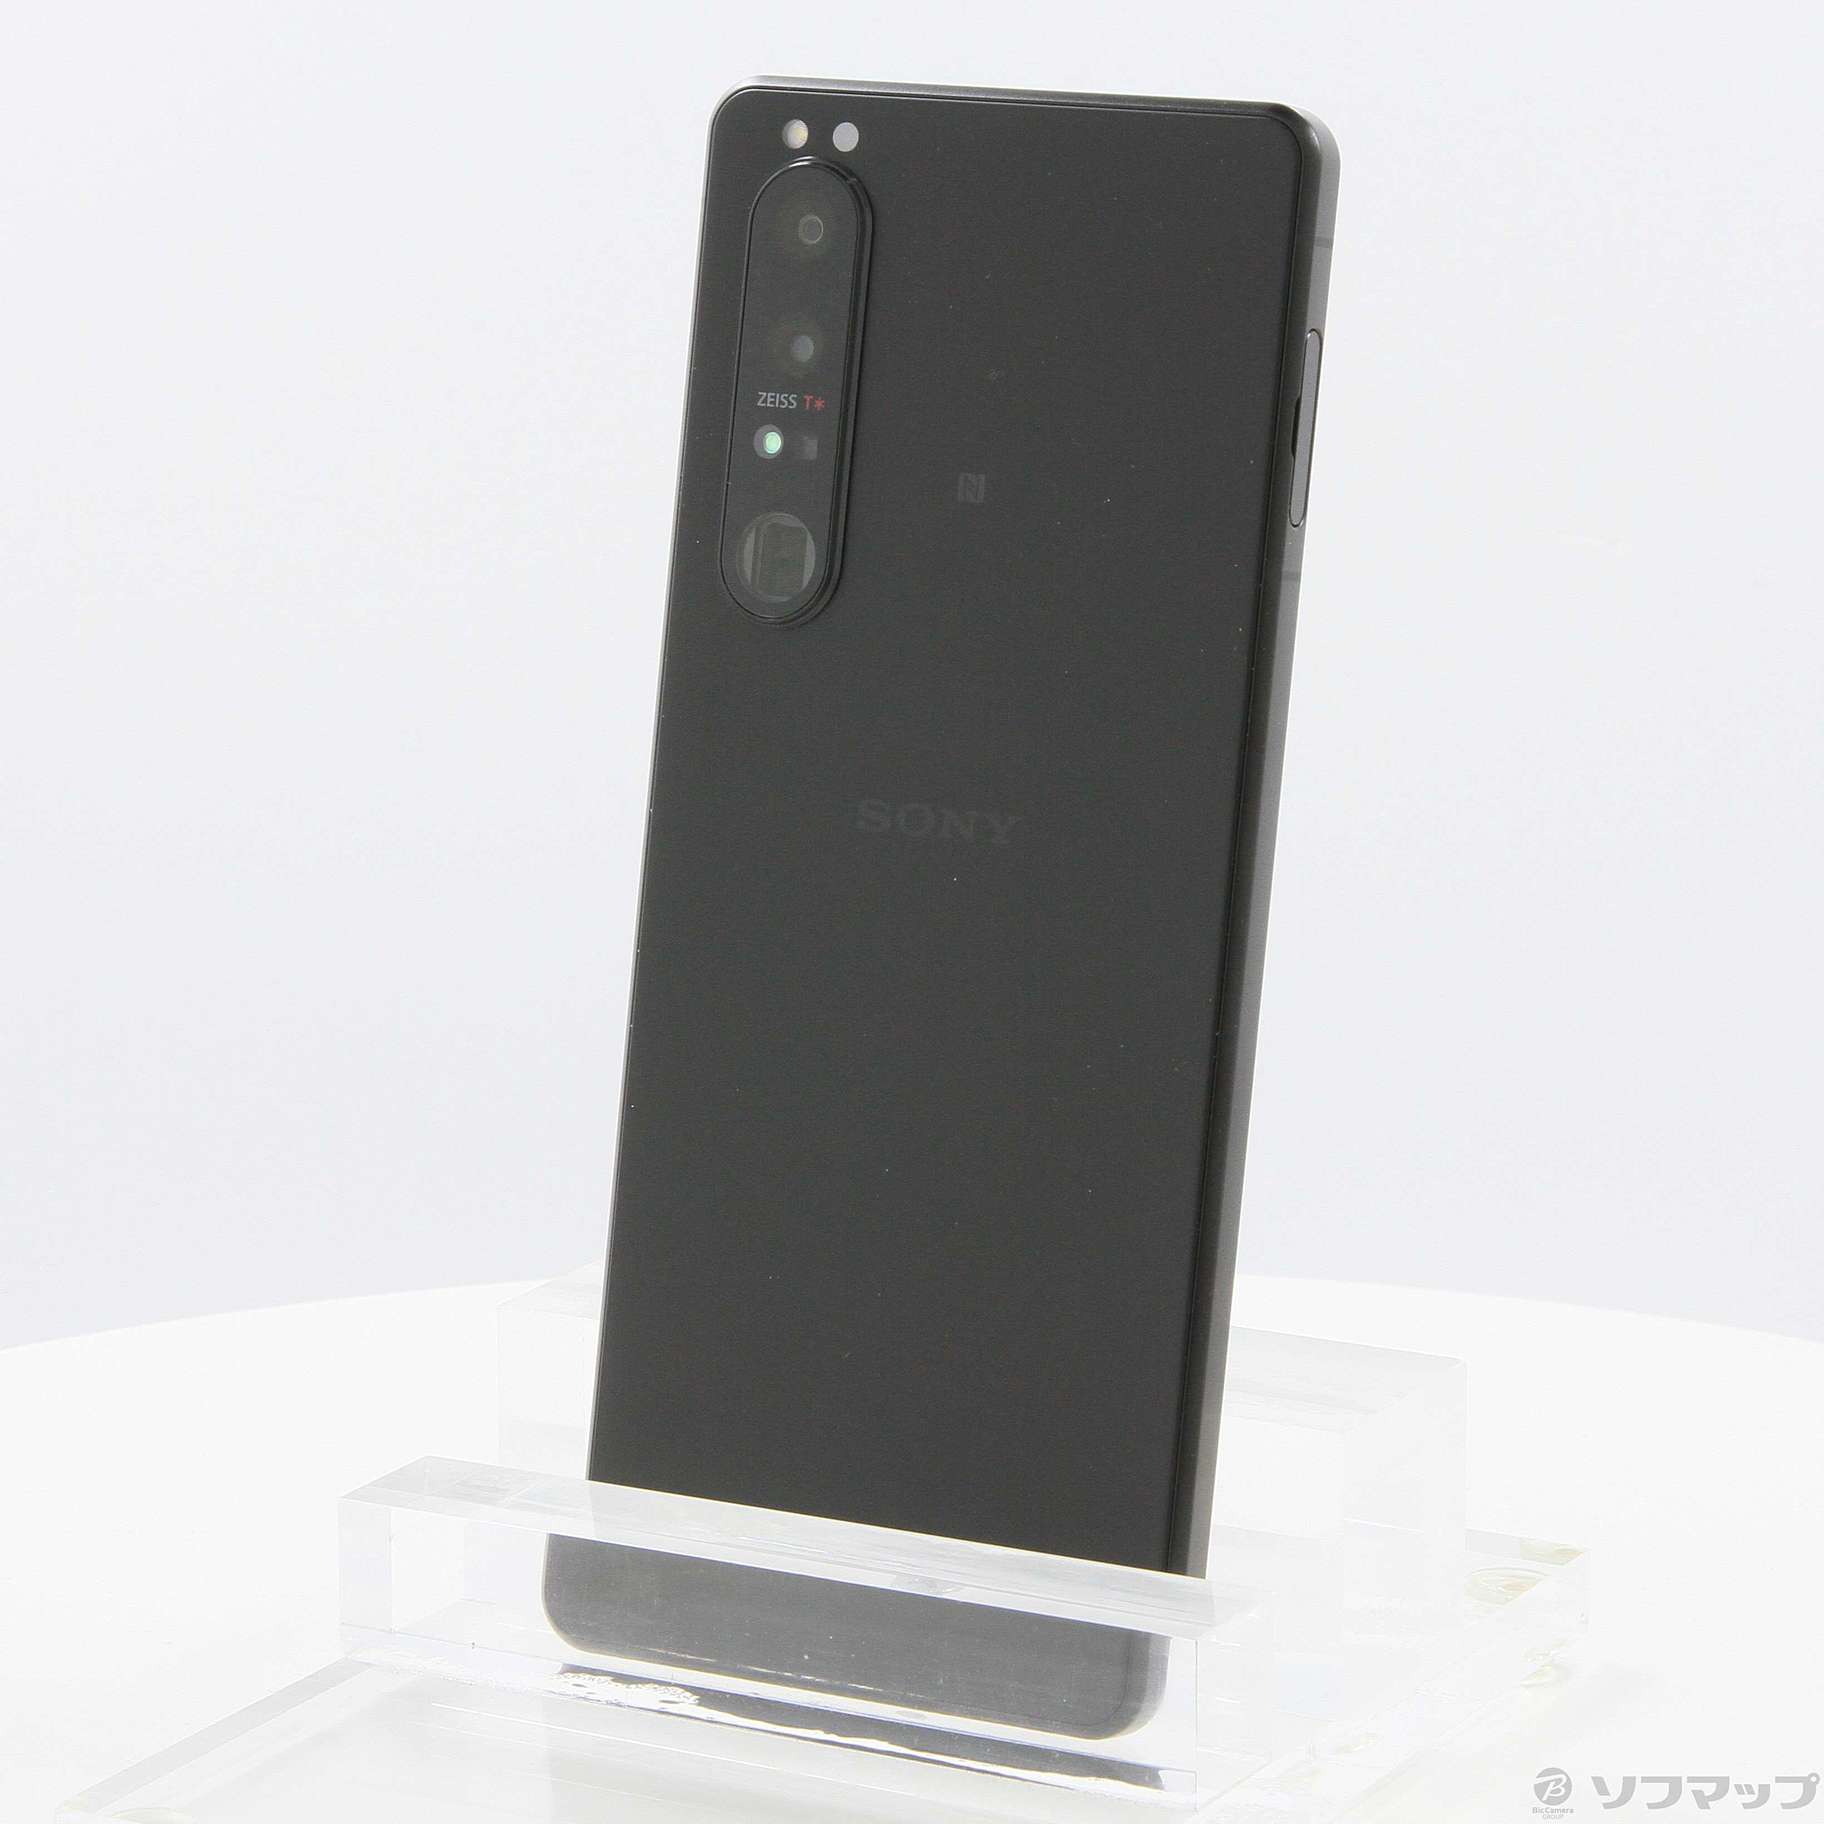 Xperia 1 III フロストブラック 512GB